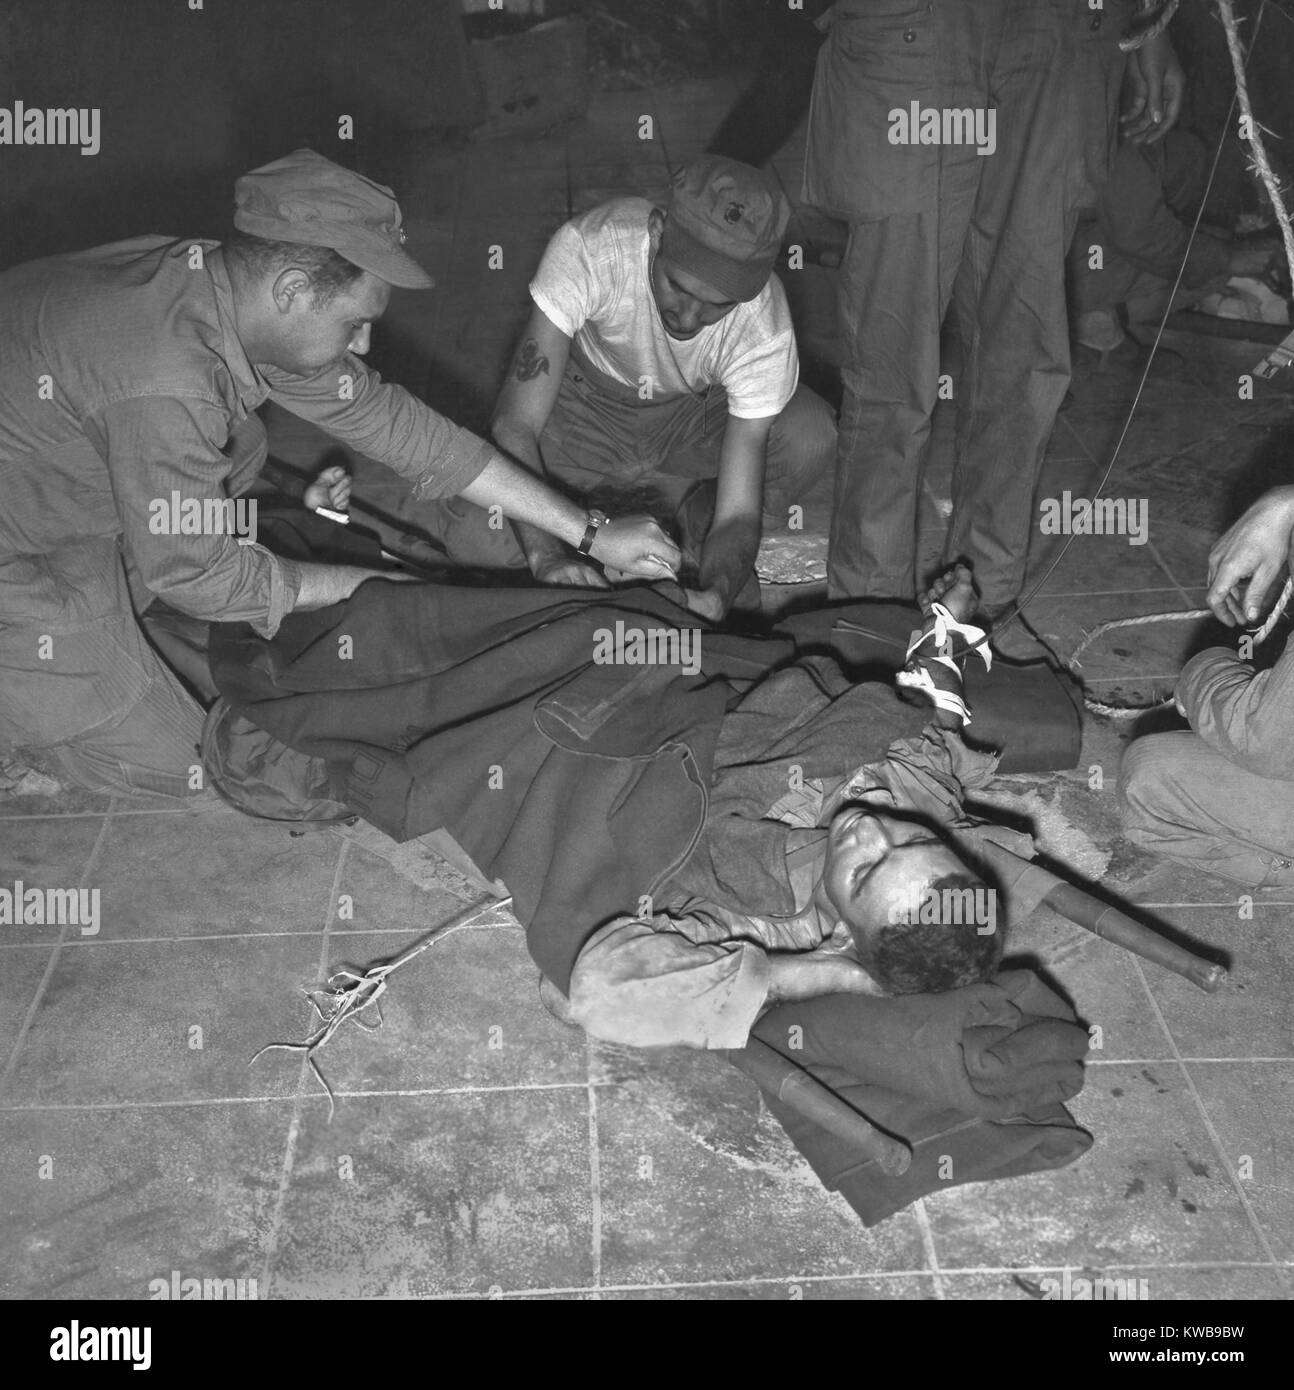 Navy corpsman gives a wounded U.S. Marine blood plasma at 'Yellow Beach' Inchon, Korea. Sept. 19, 1950. After stabilization, the wounded were transferred to hospital ships. Korean War, 1950-53. (BSLOC 2014 11 47) Stock Photo